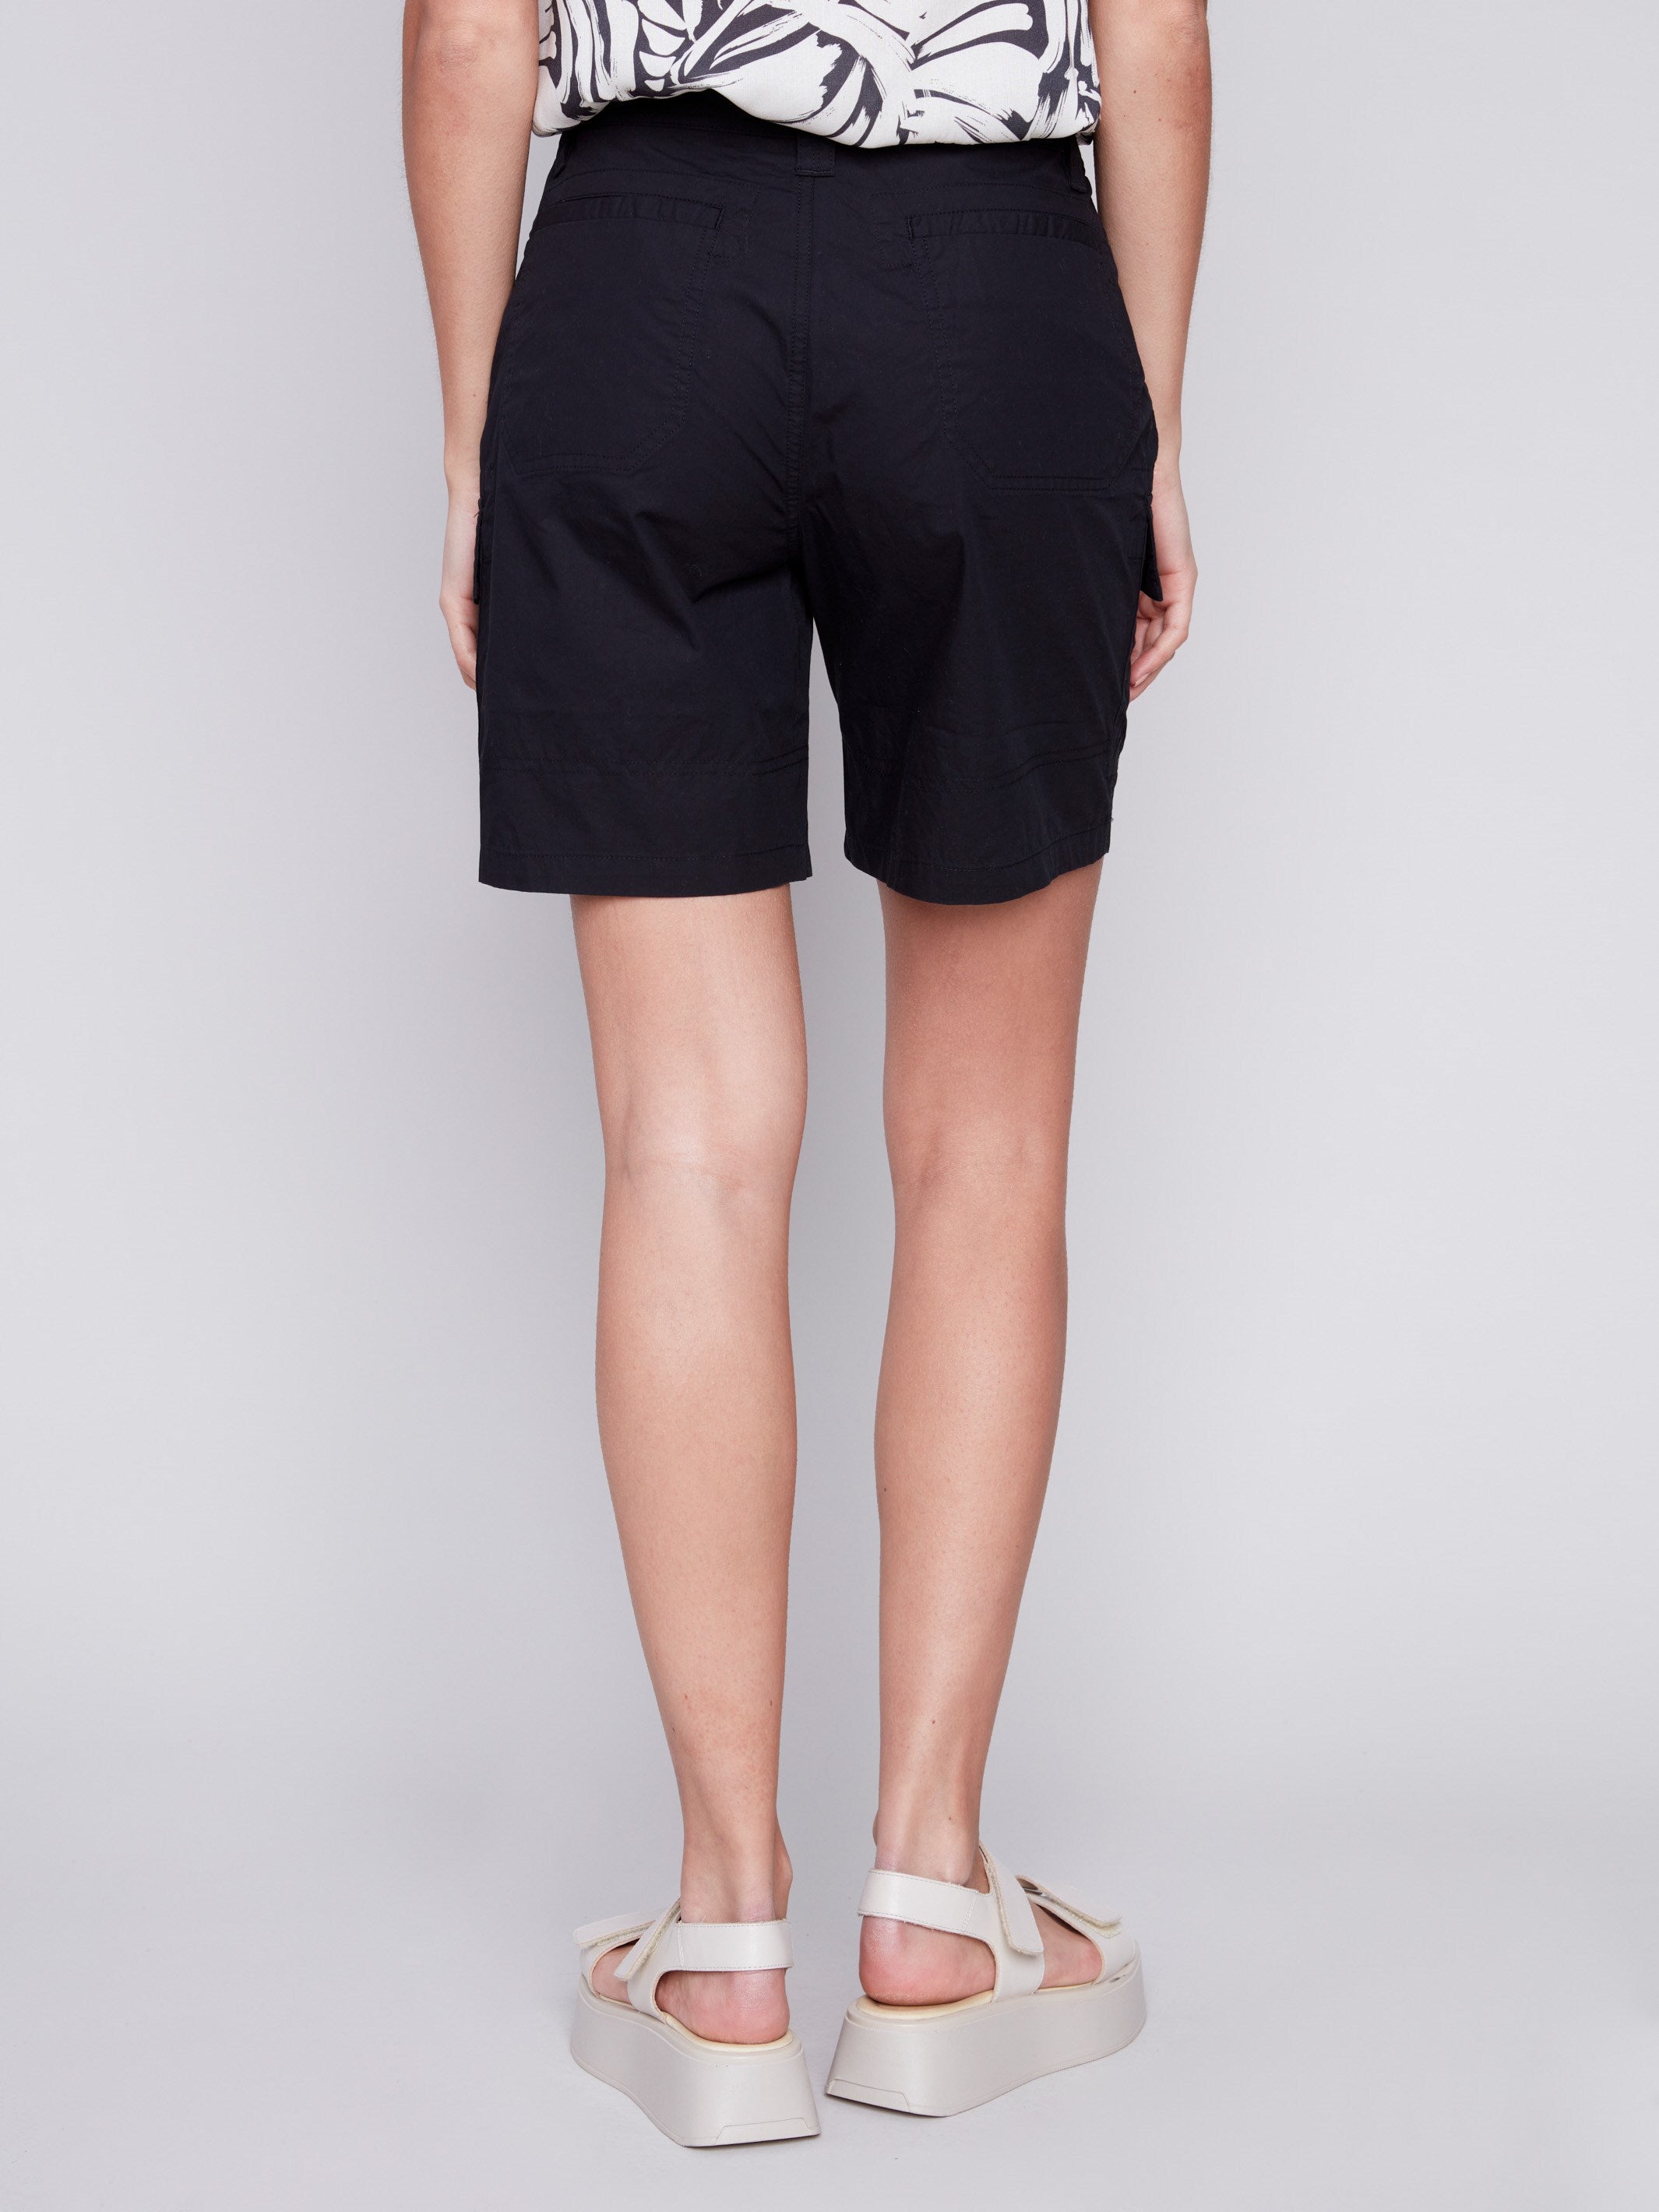 Charlie B Cotton Shorts with Cargo Pockets - Black - Image 3